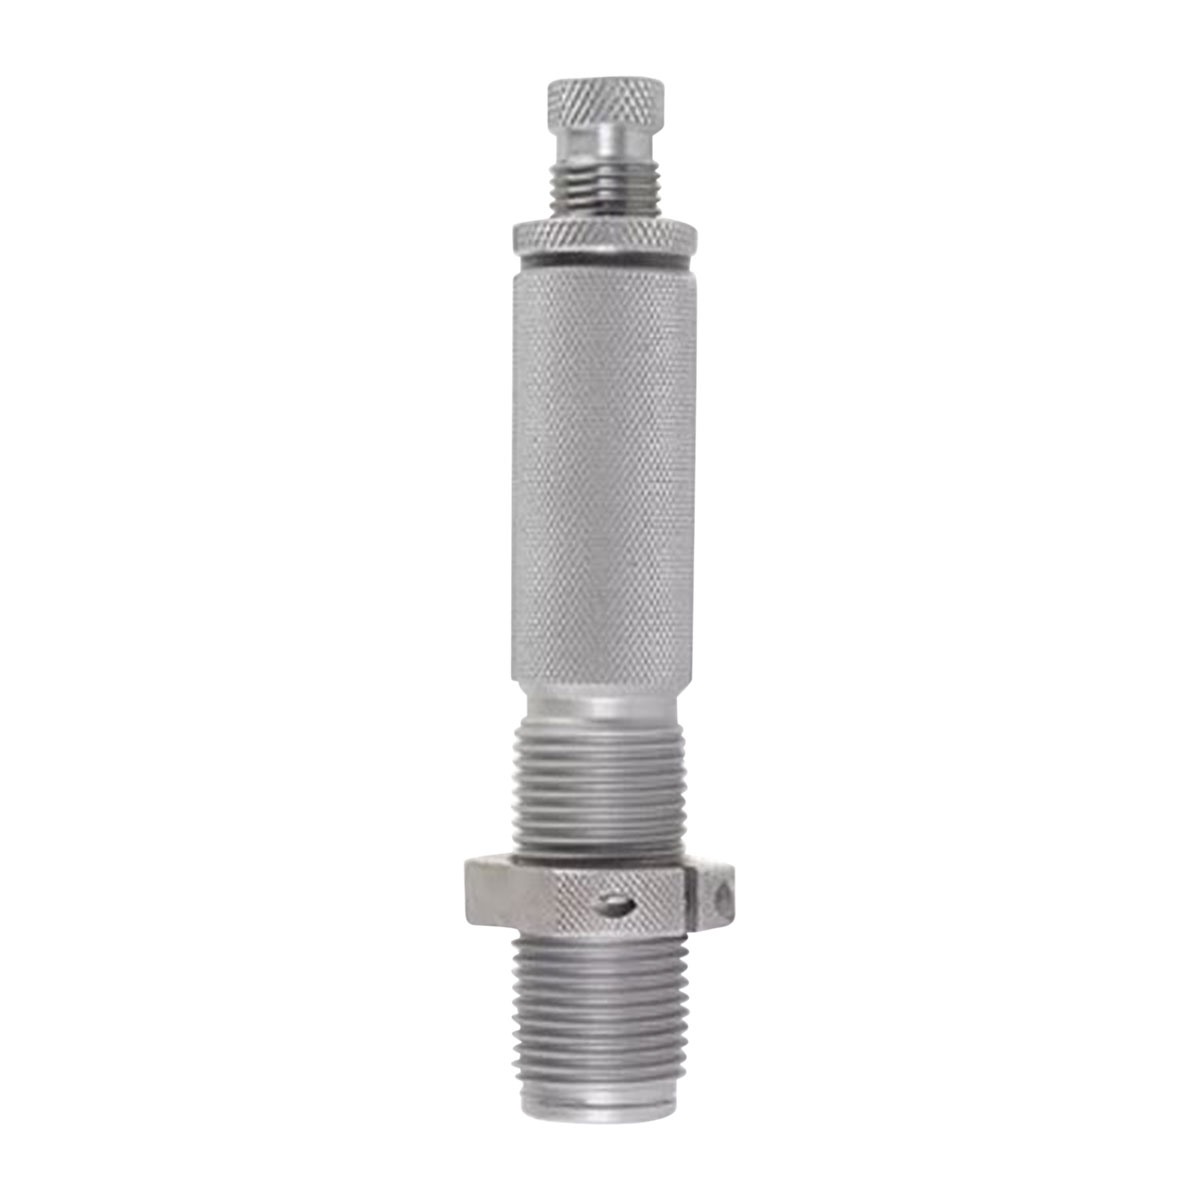 Seating Die #044162 .411 HORNADY Reloading Tools 405 Winchester 